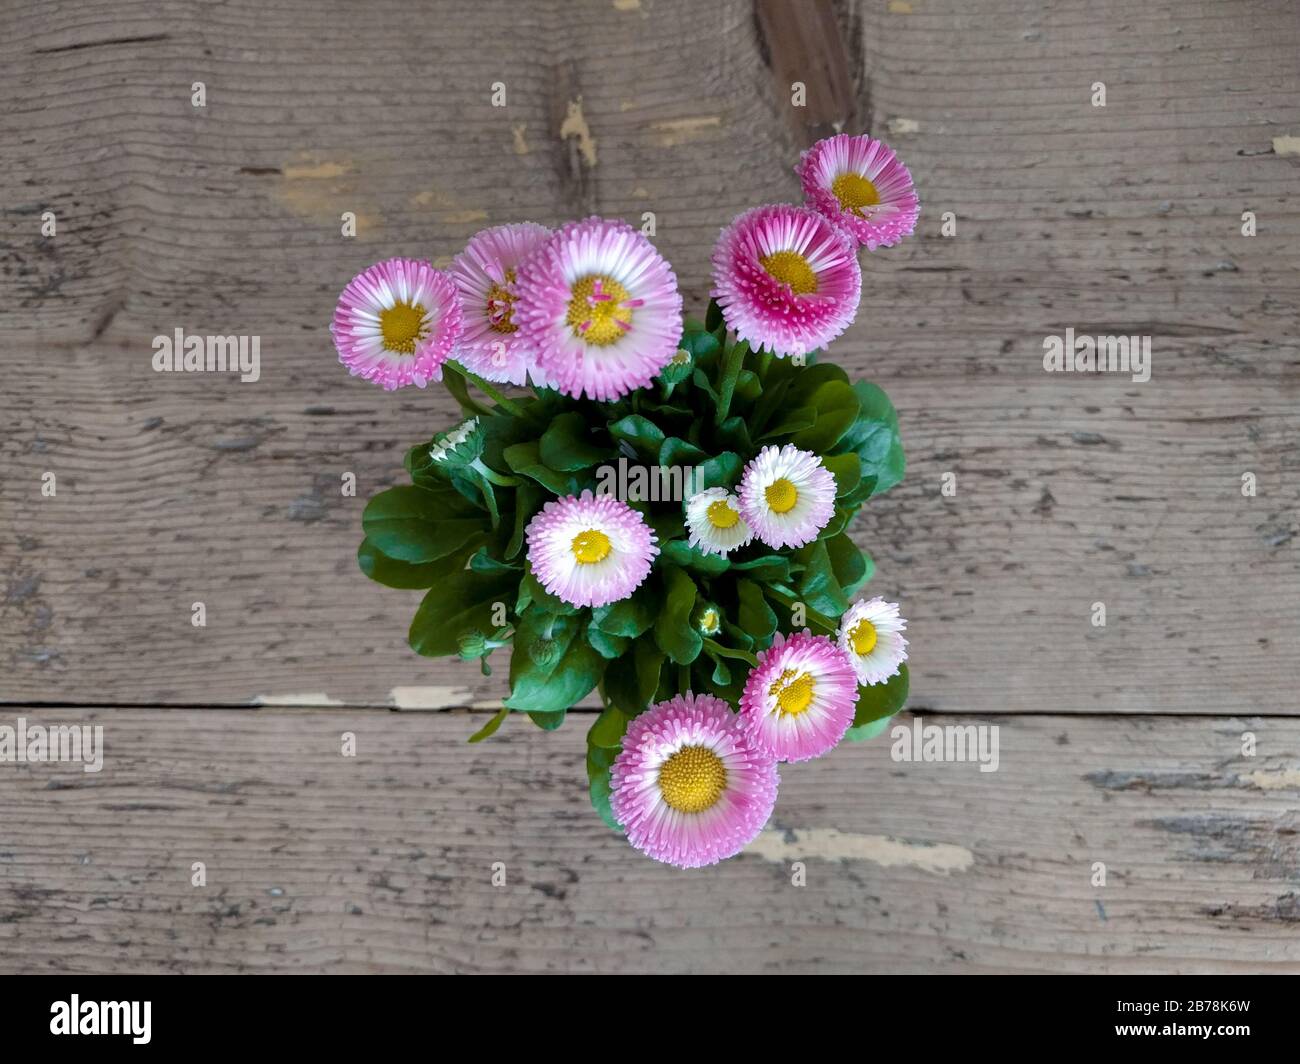 Daisy pomponette plant with pink flowers Stock Photo